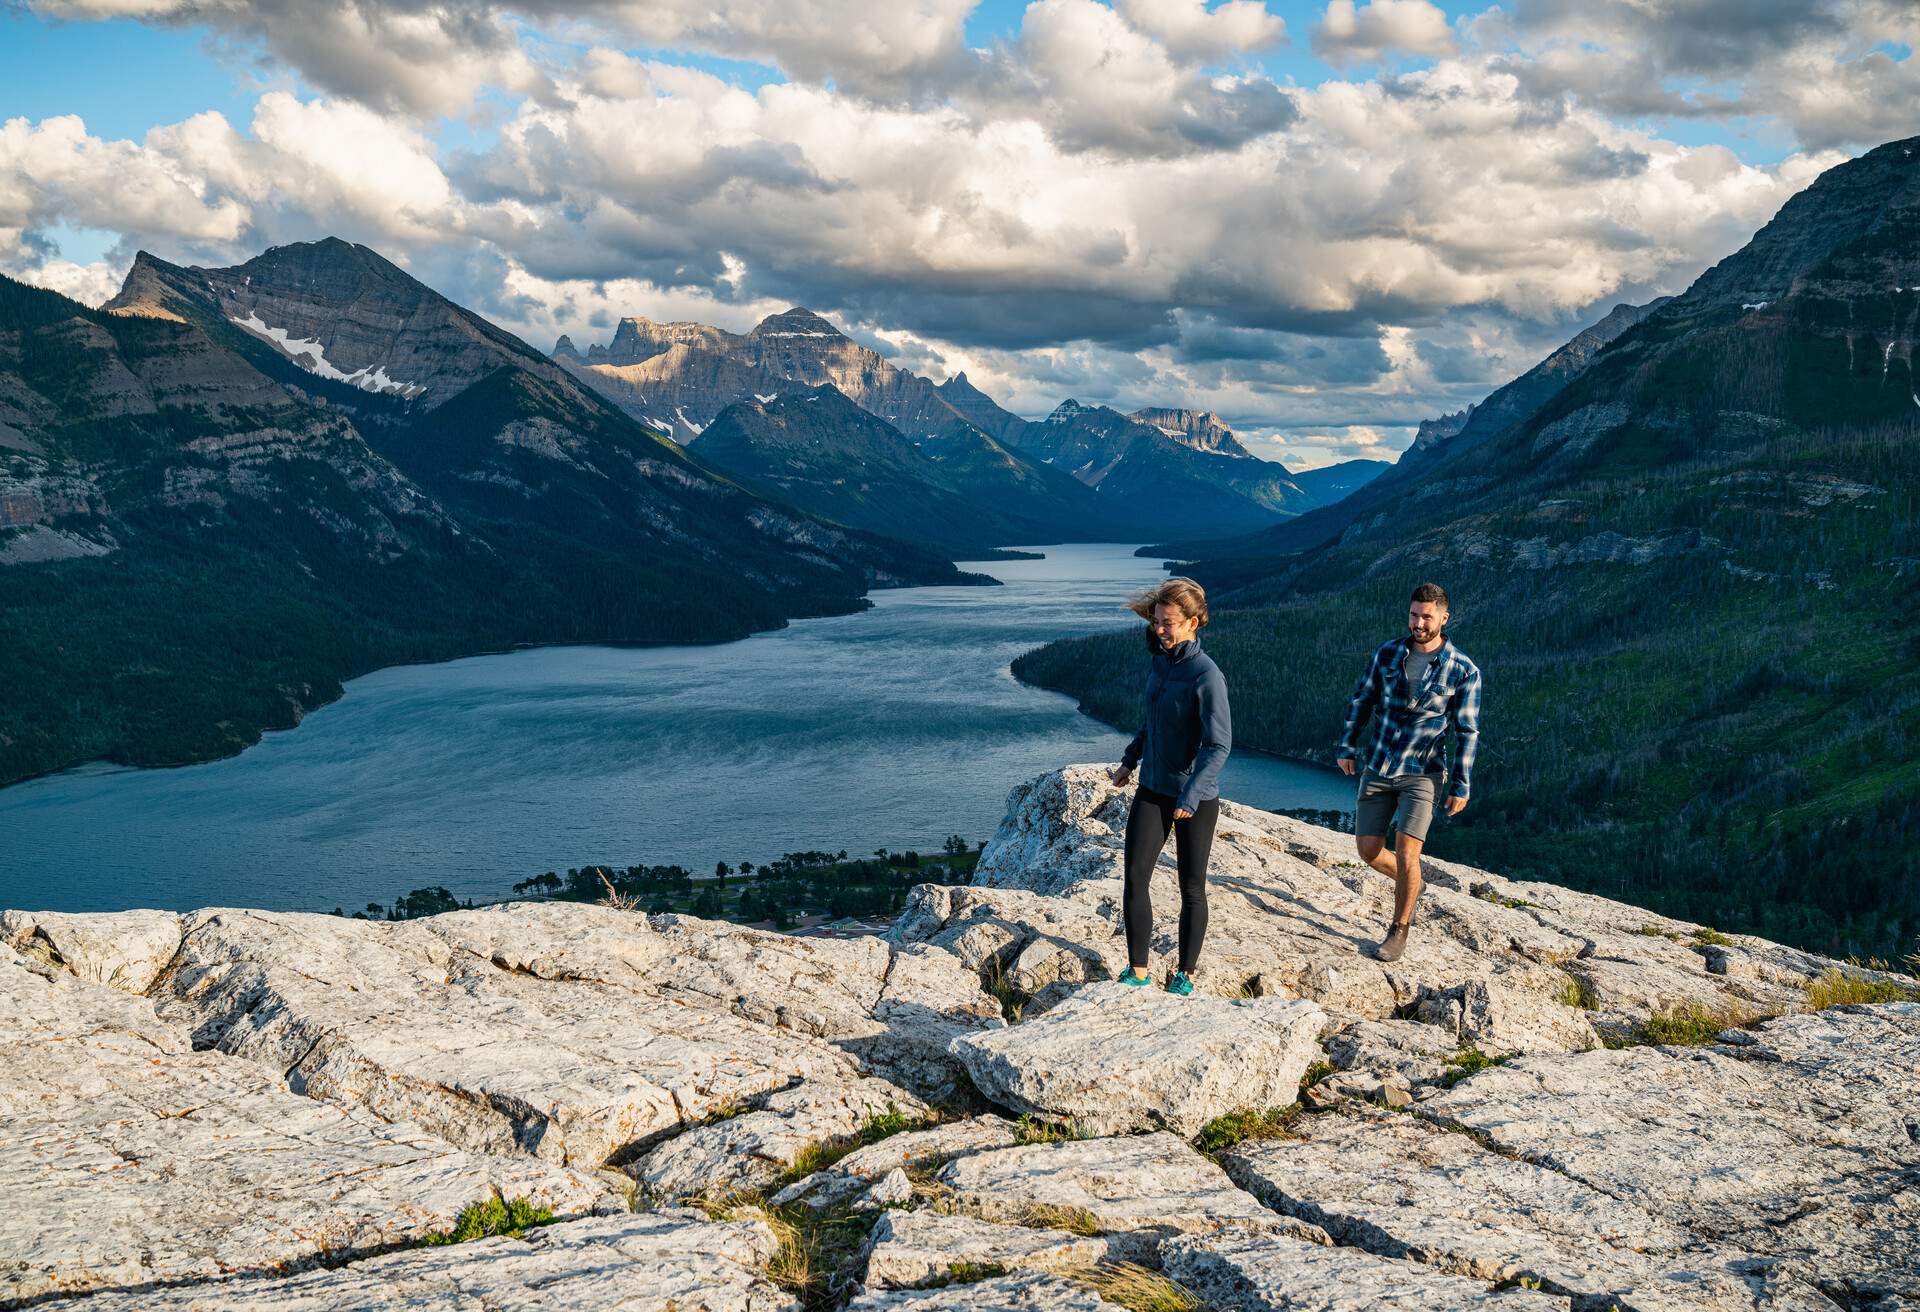 DEST_CANADA_WATERTON_LAKES_NATIONAL_PARK_MOUNTAIN_PEOPLE_COUPLE_HIKING_GettyImages-1281853262